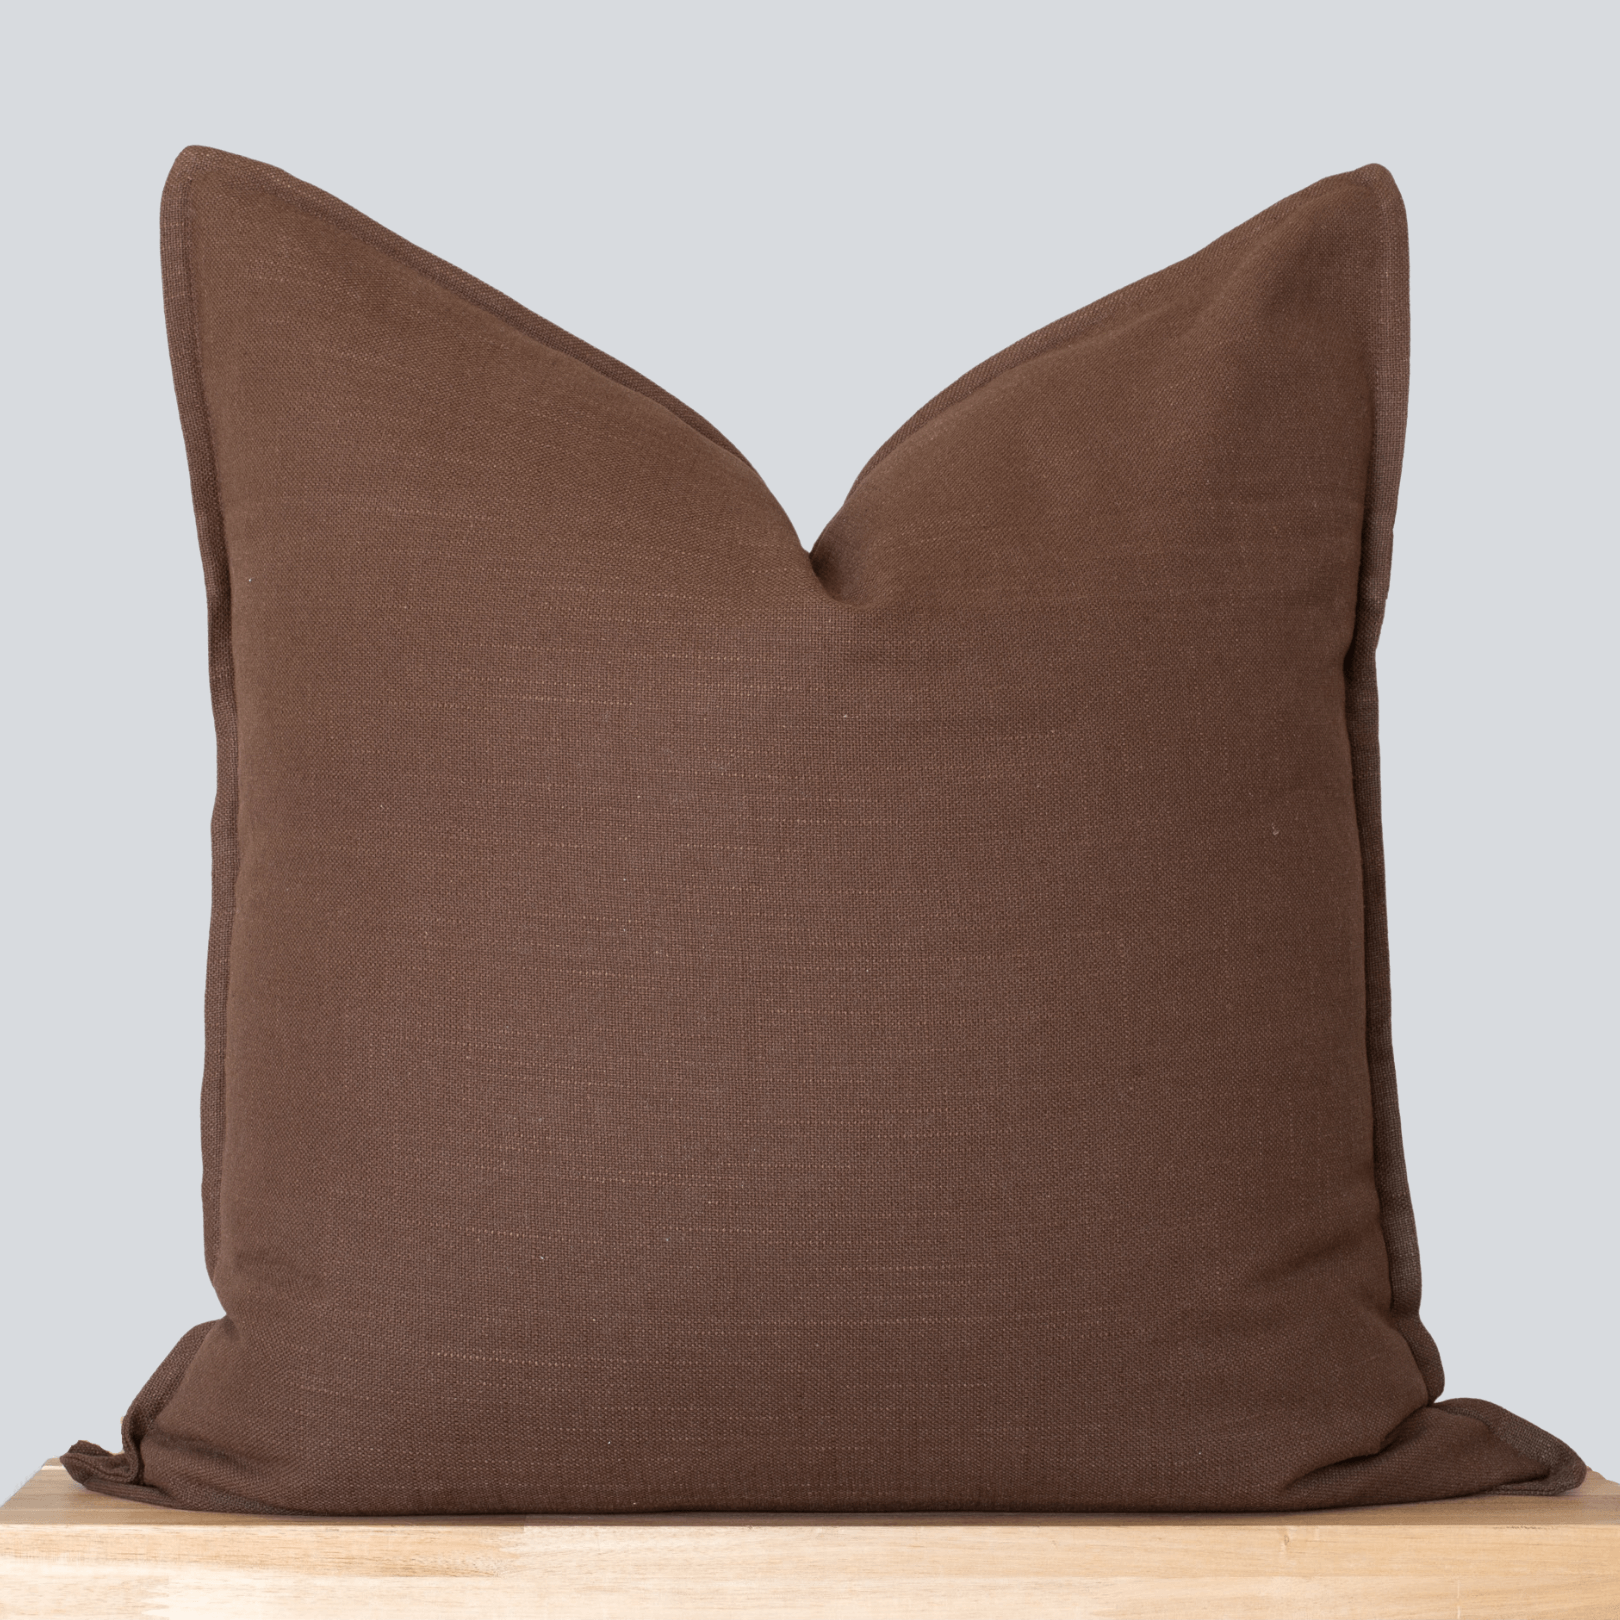 Maddison Small Lumbar Pillow Cover - PoweredByPeople